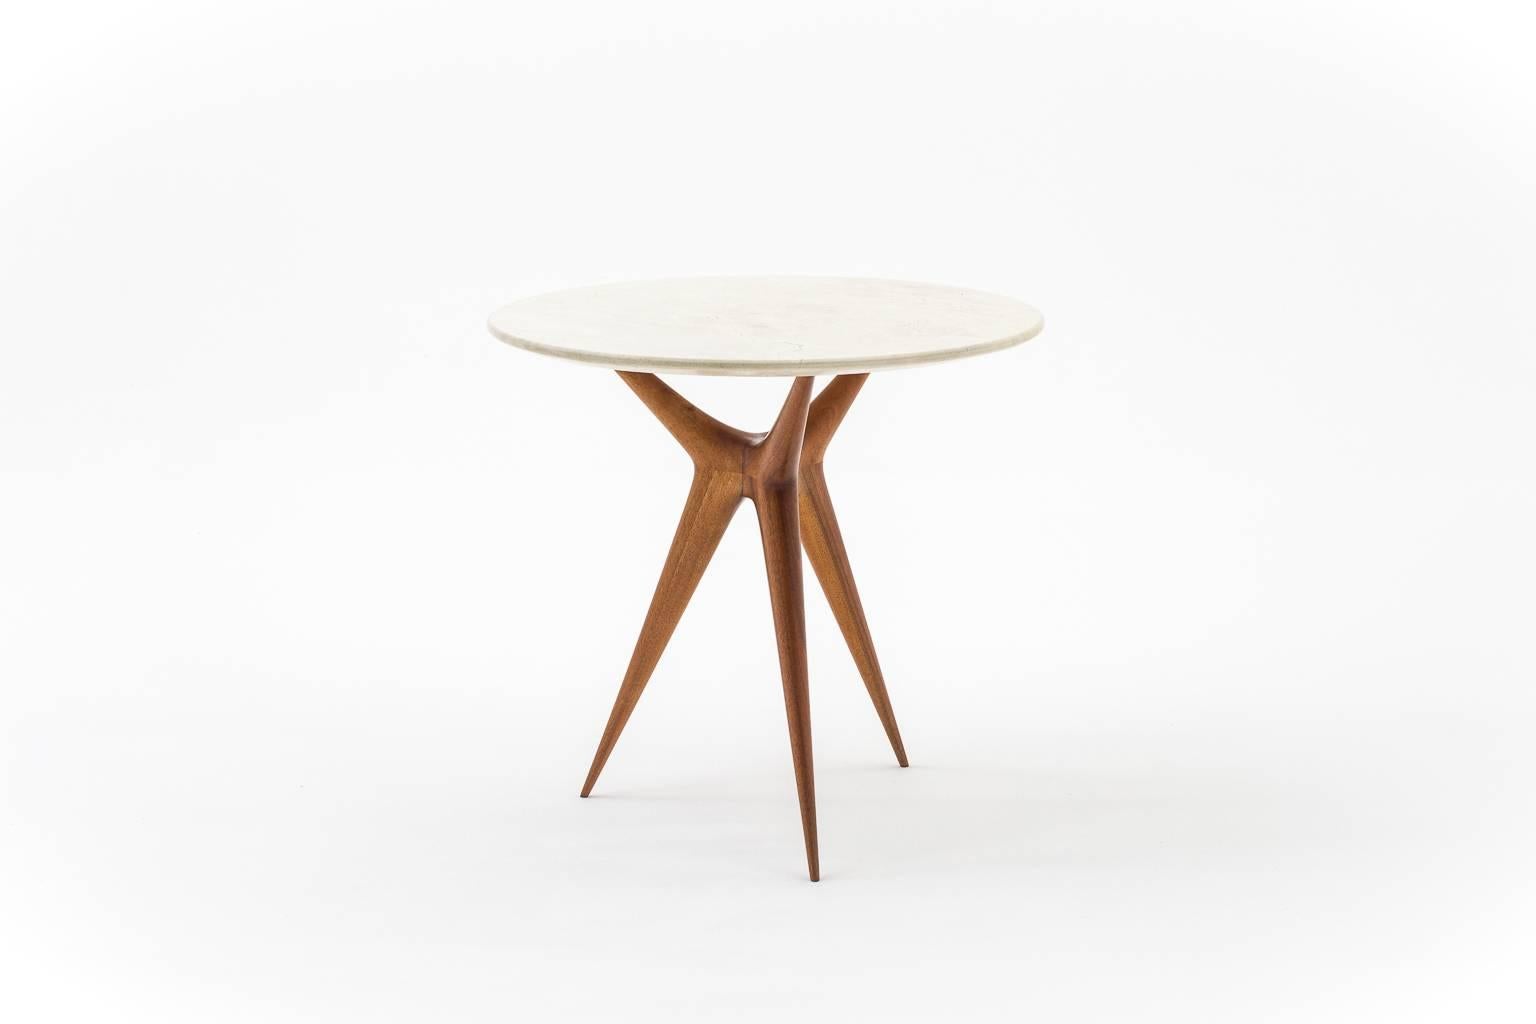 Beautiful small side table by Ico Parisi for Ariberto Colombo, Italy, circa 1950.
Refined tripod base made of solid walnut, on top lays a crème marble top.
In excellent condition.
 